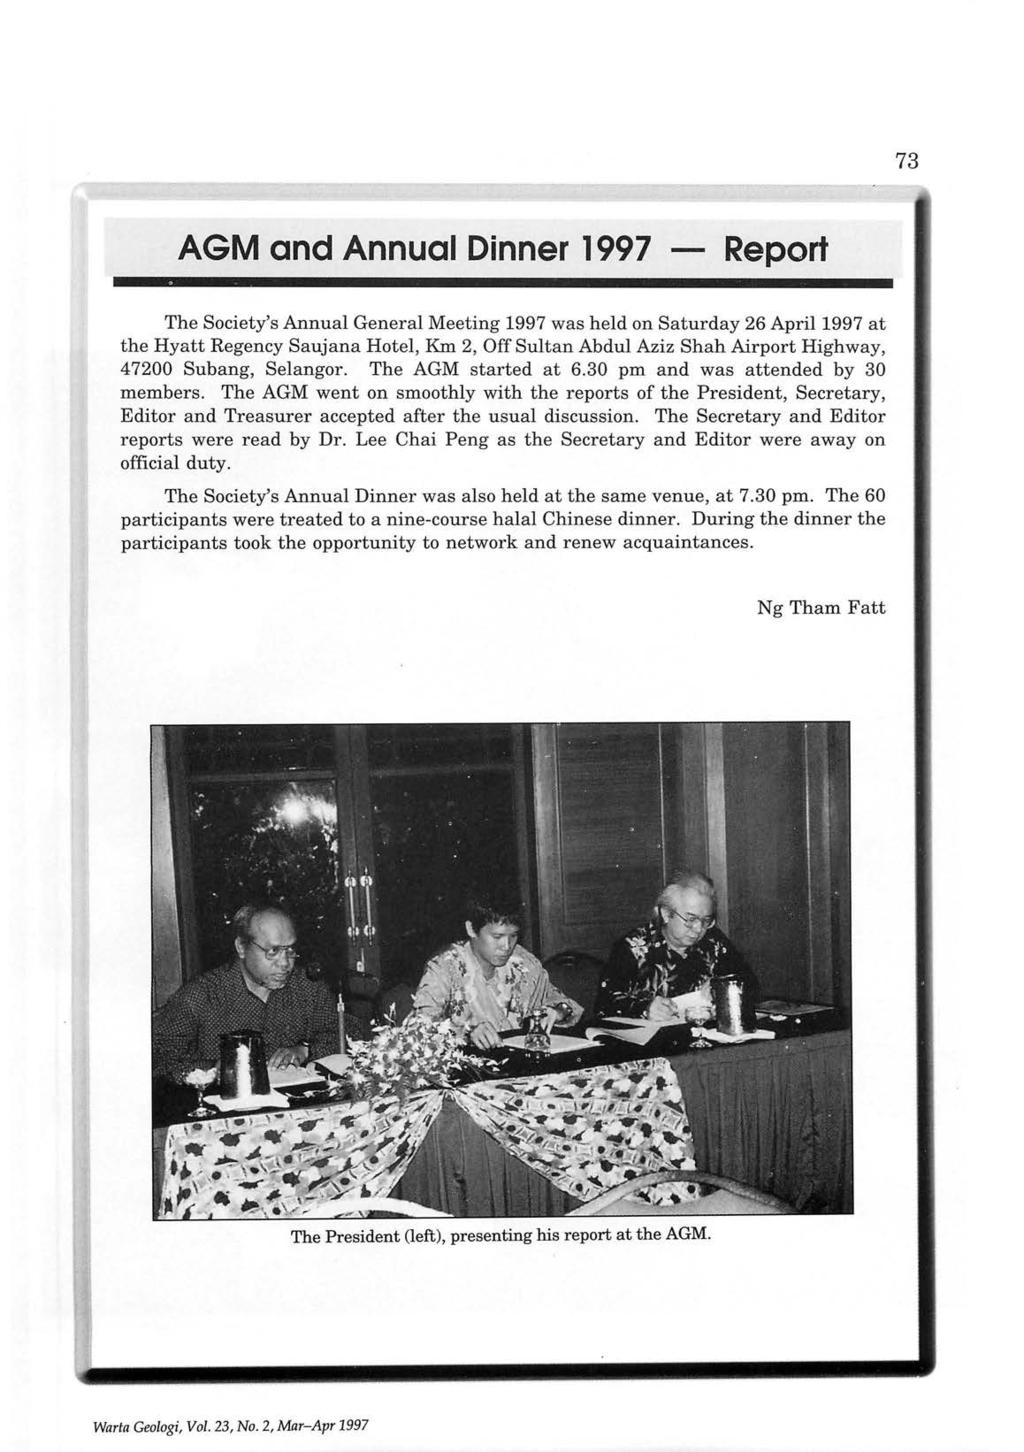 73 AGM and Annual Dinner 1997 - Report The Society's Annual General Meeting 1997 was held on Saturday 26 April 1997 at the Hyatt Regency Saujana Hotel, Km 2, Off Sultan Abdul Aziz Shah Airport